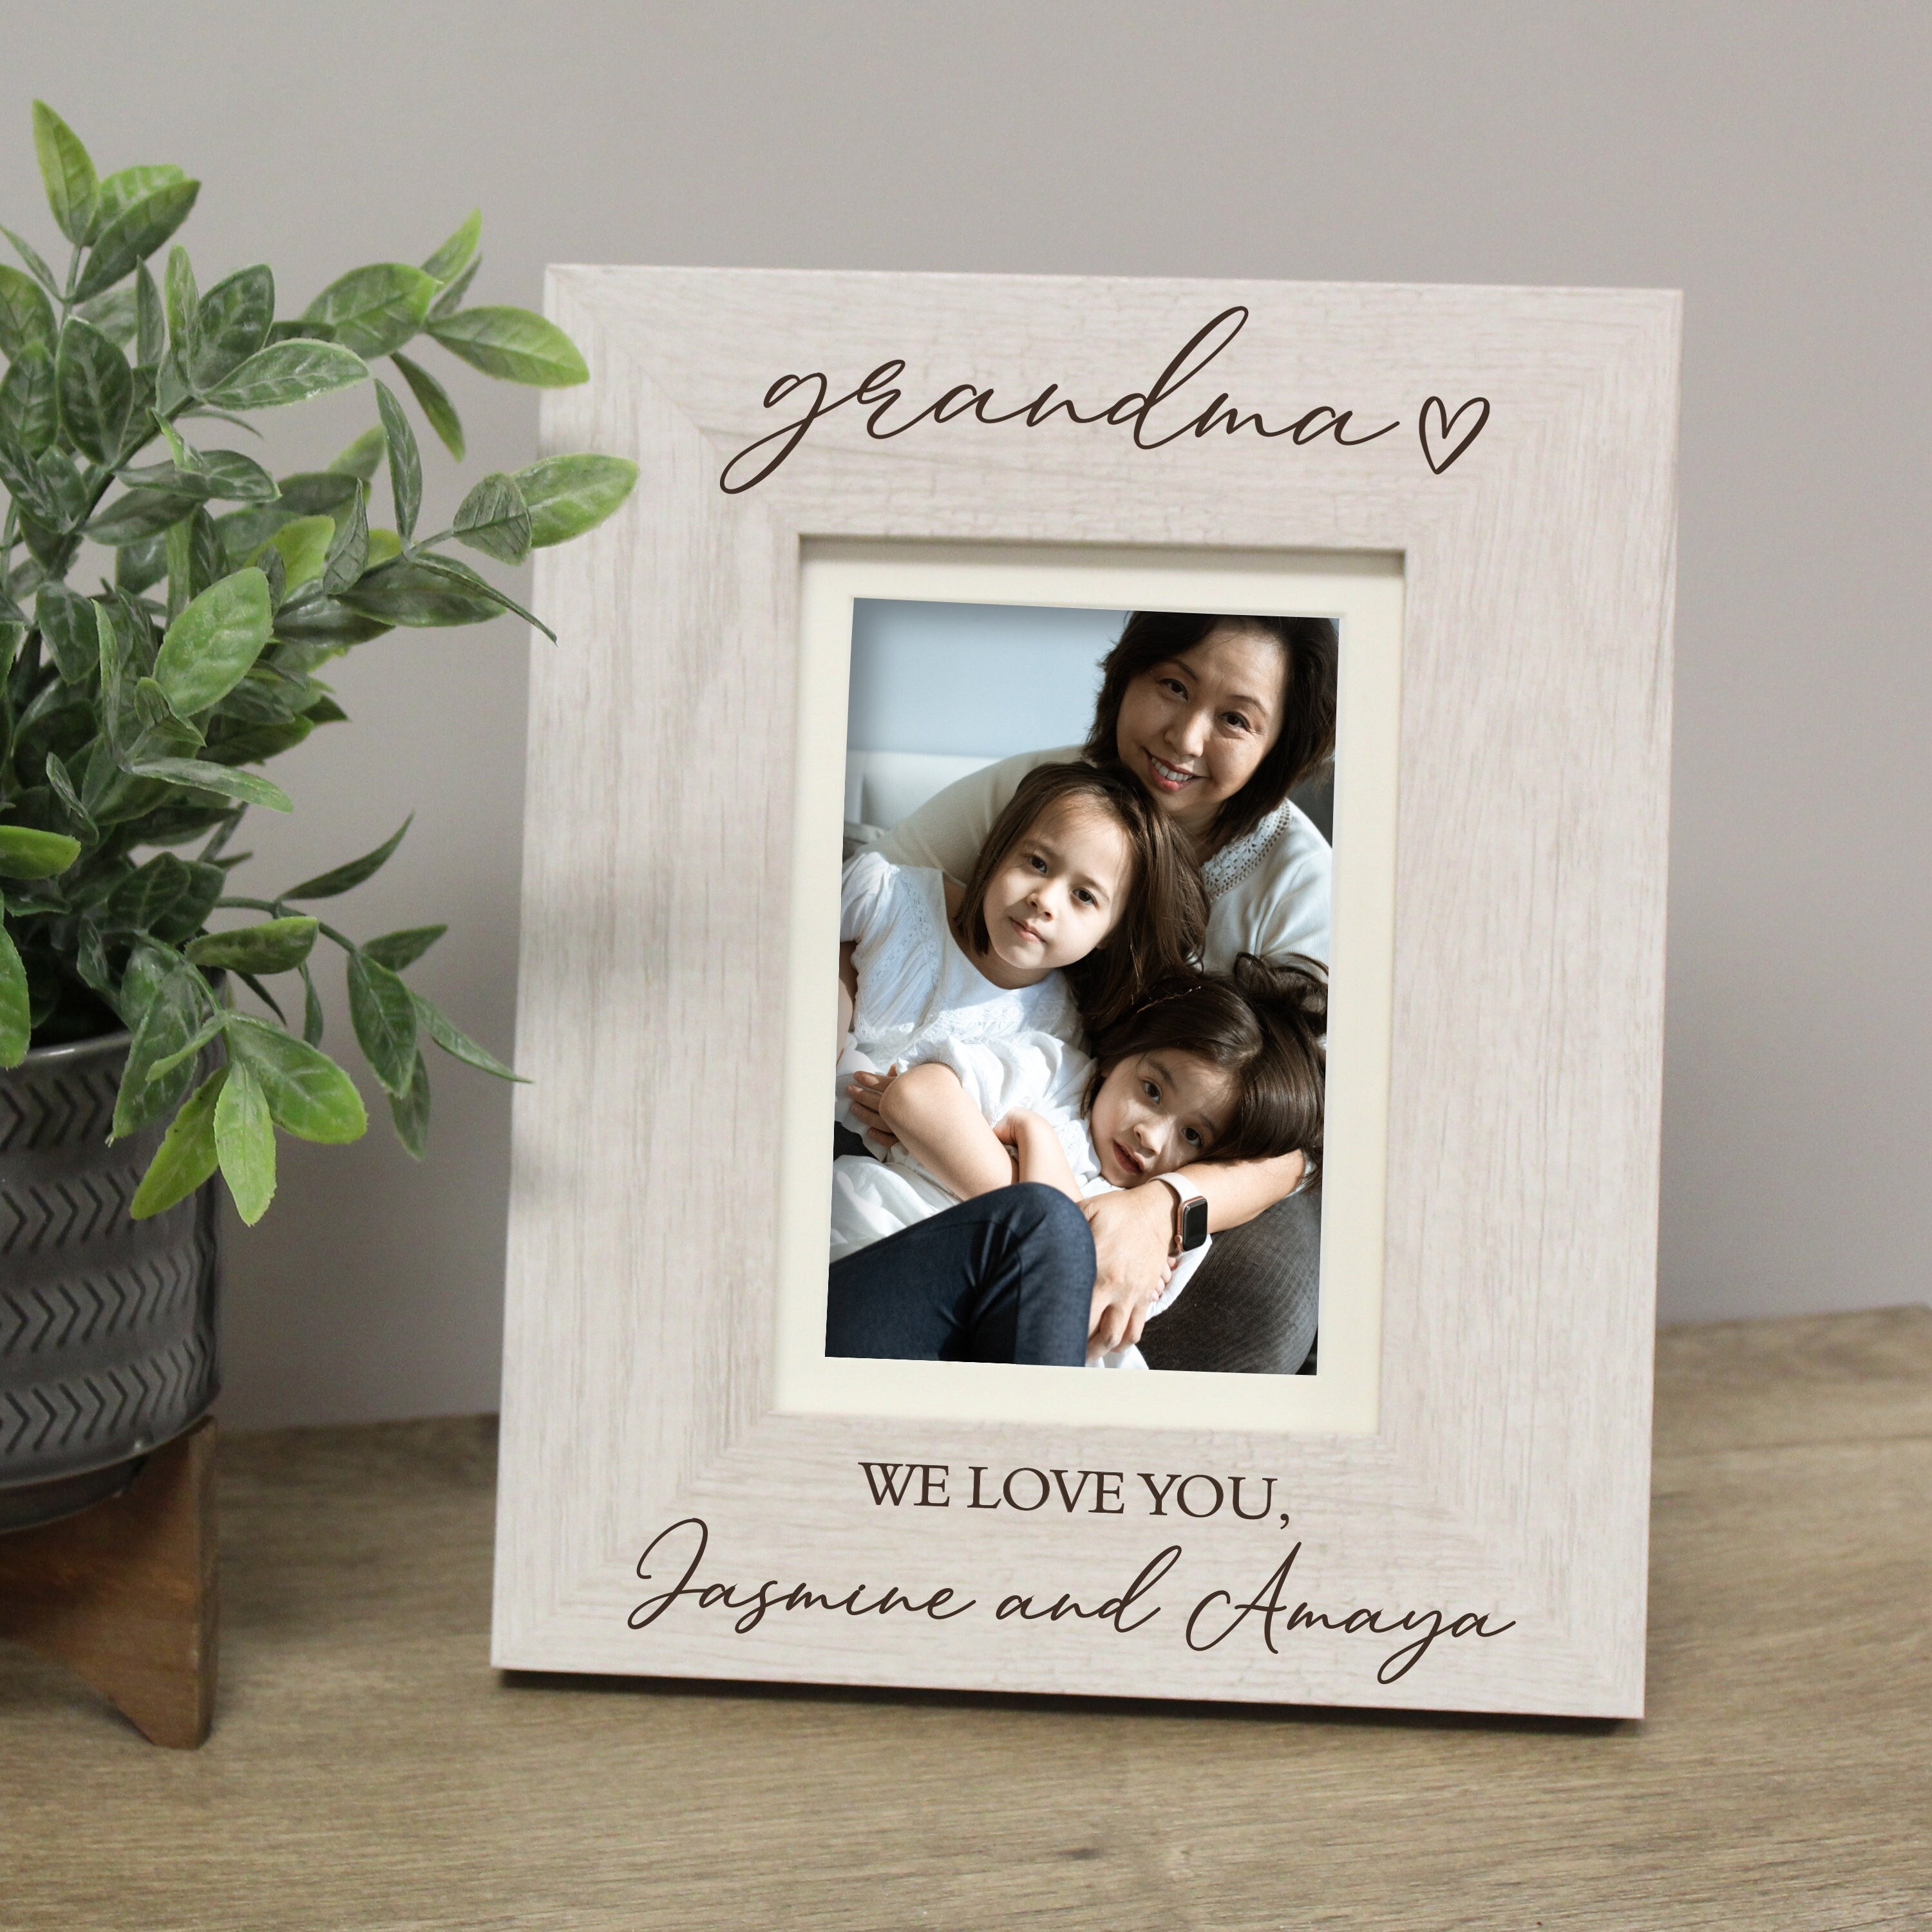 cocomong Gifts for Grandma, Grandma Gifts for Mothers Day, Grandma Picture  Frame, Gift from Grandchildren, Grandparents Day Christmas Gifts - Holds 2